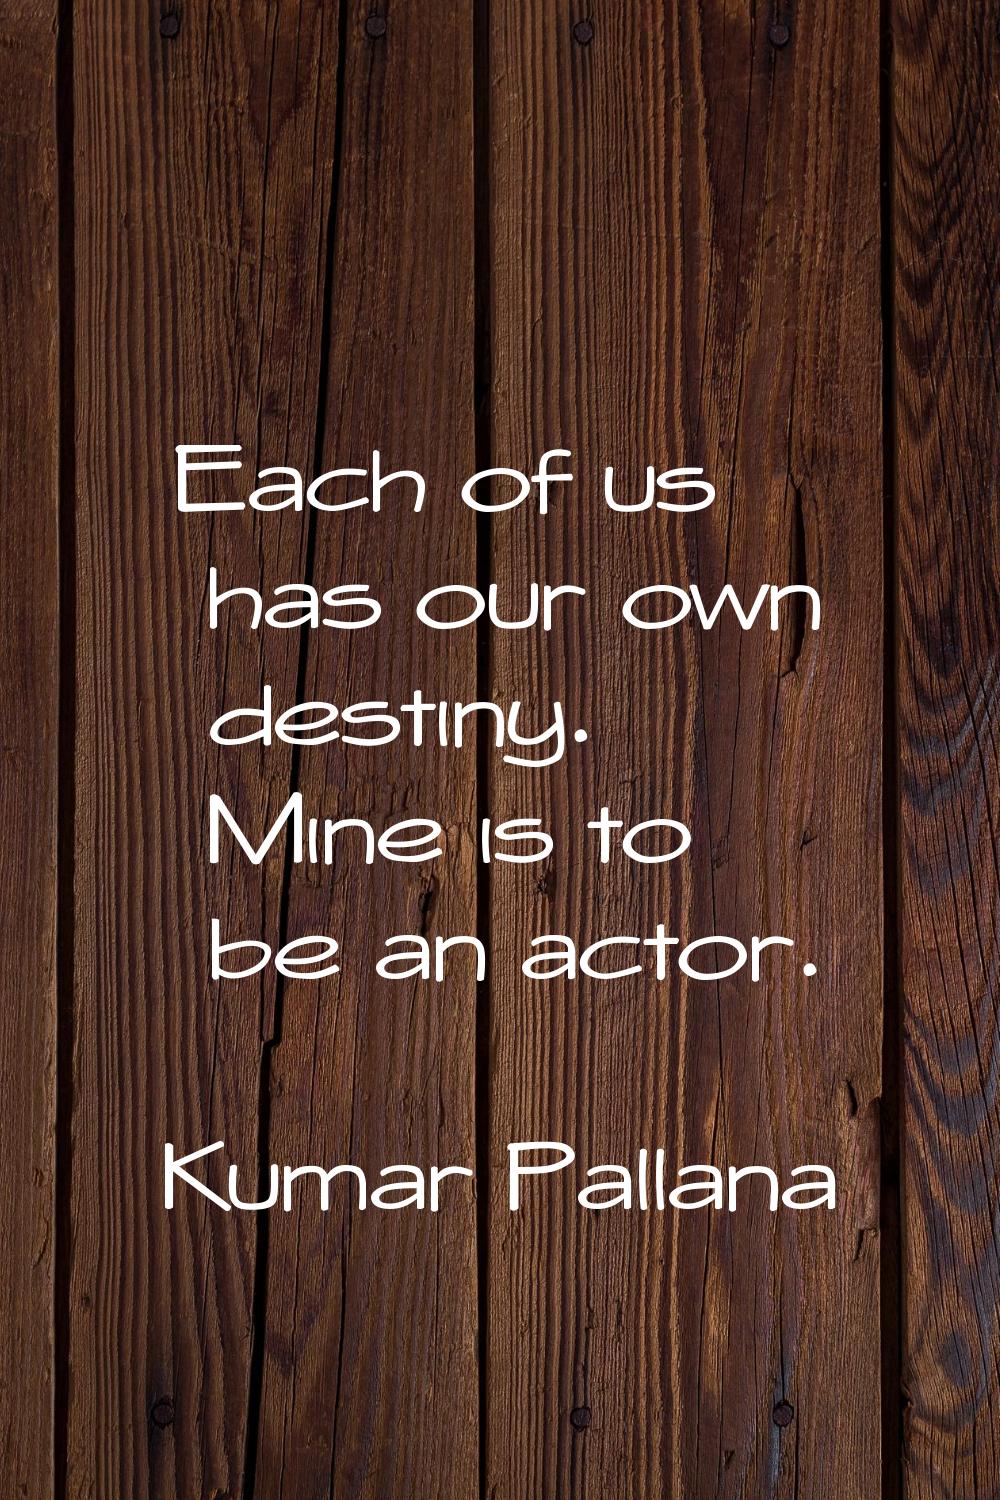 Each of us has our own destiny. Mine is to be an actor.